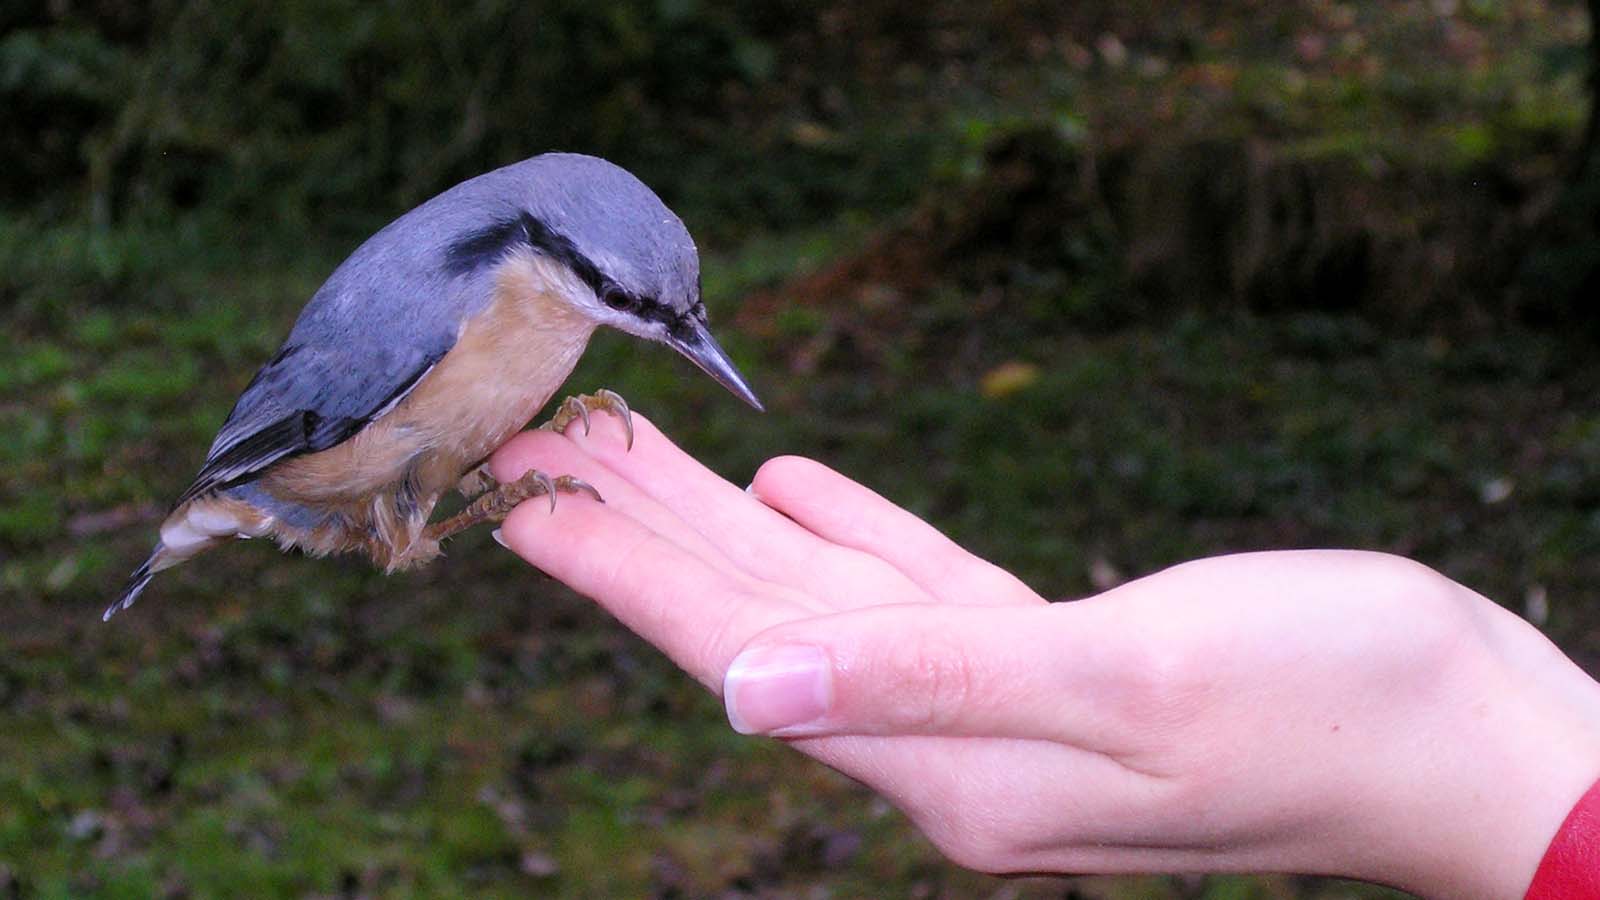 Nuthatch perched on a person's hand